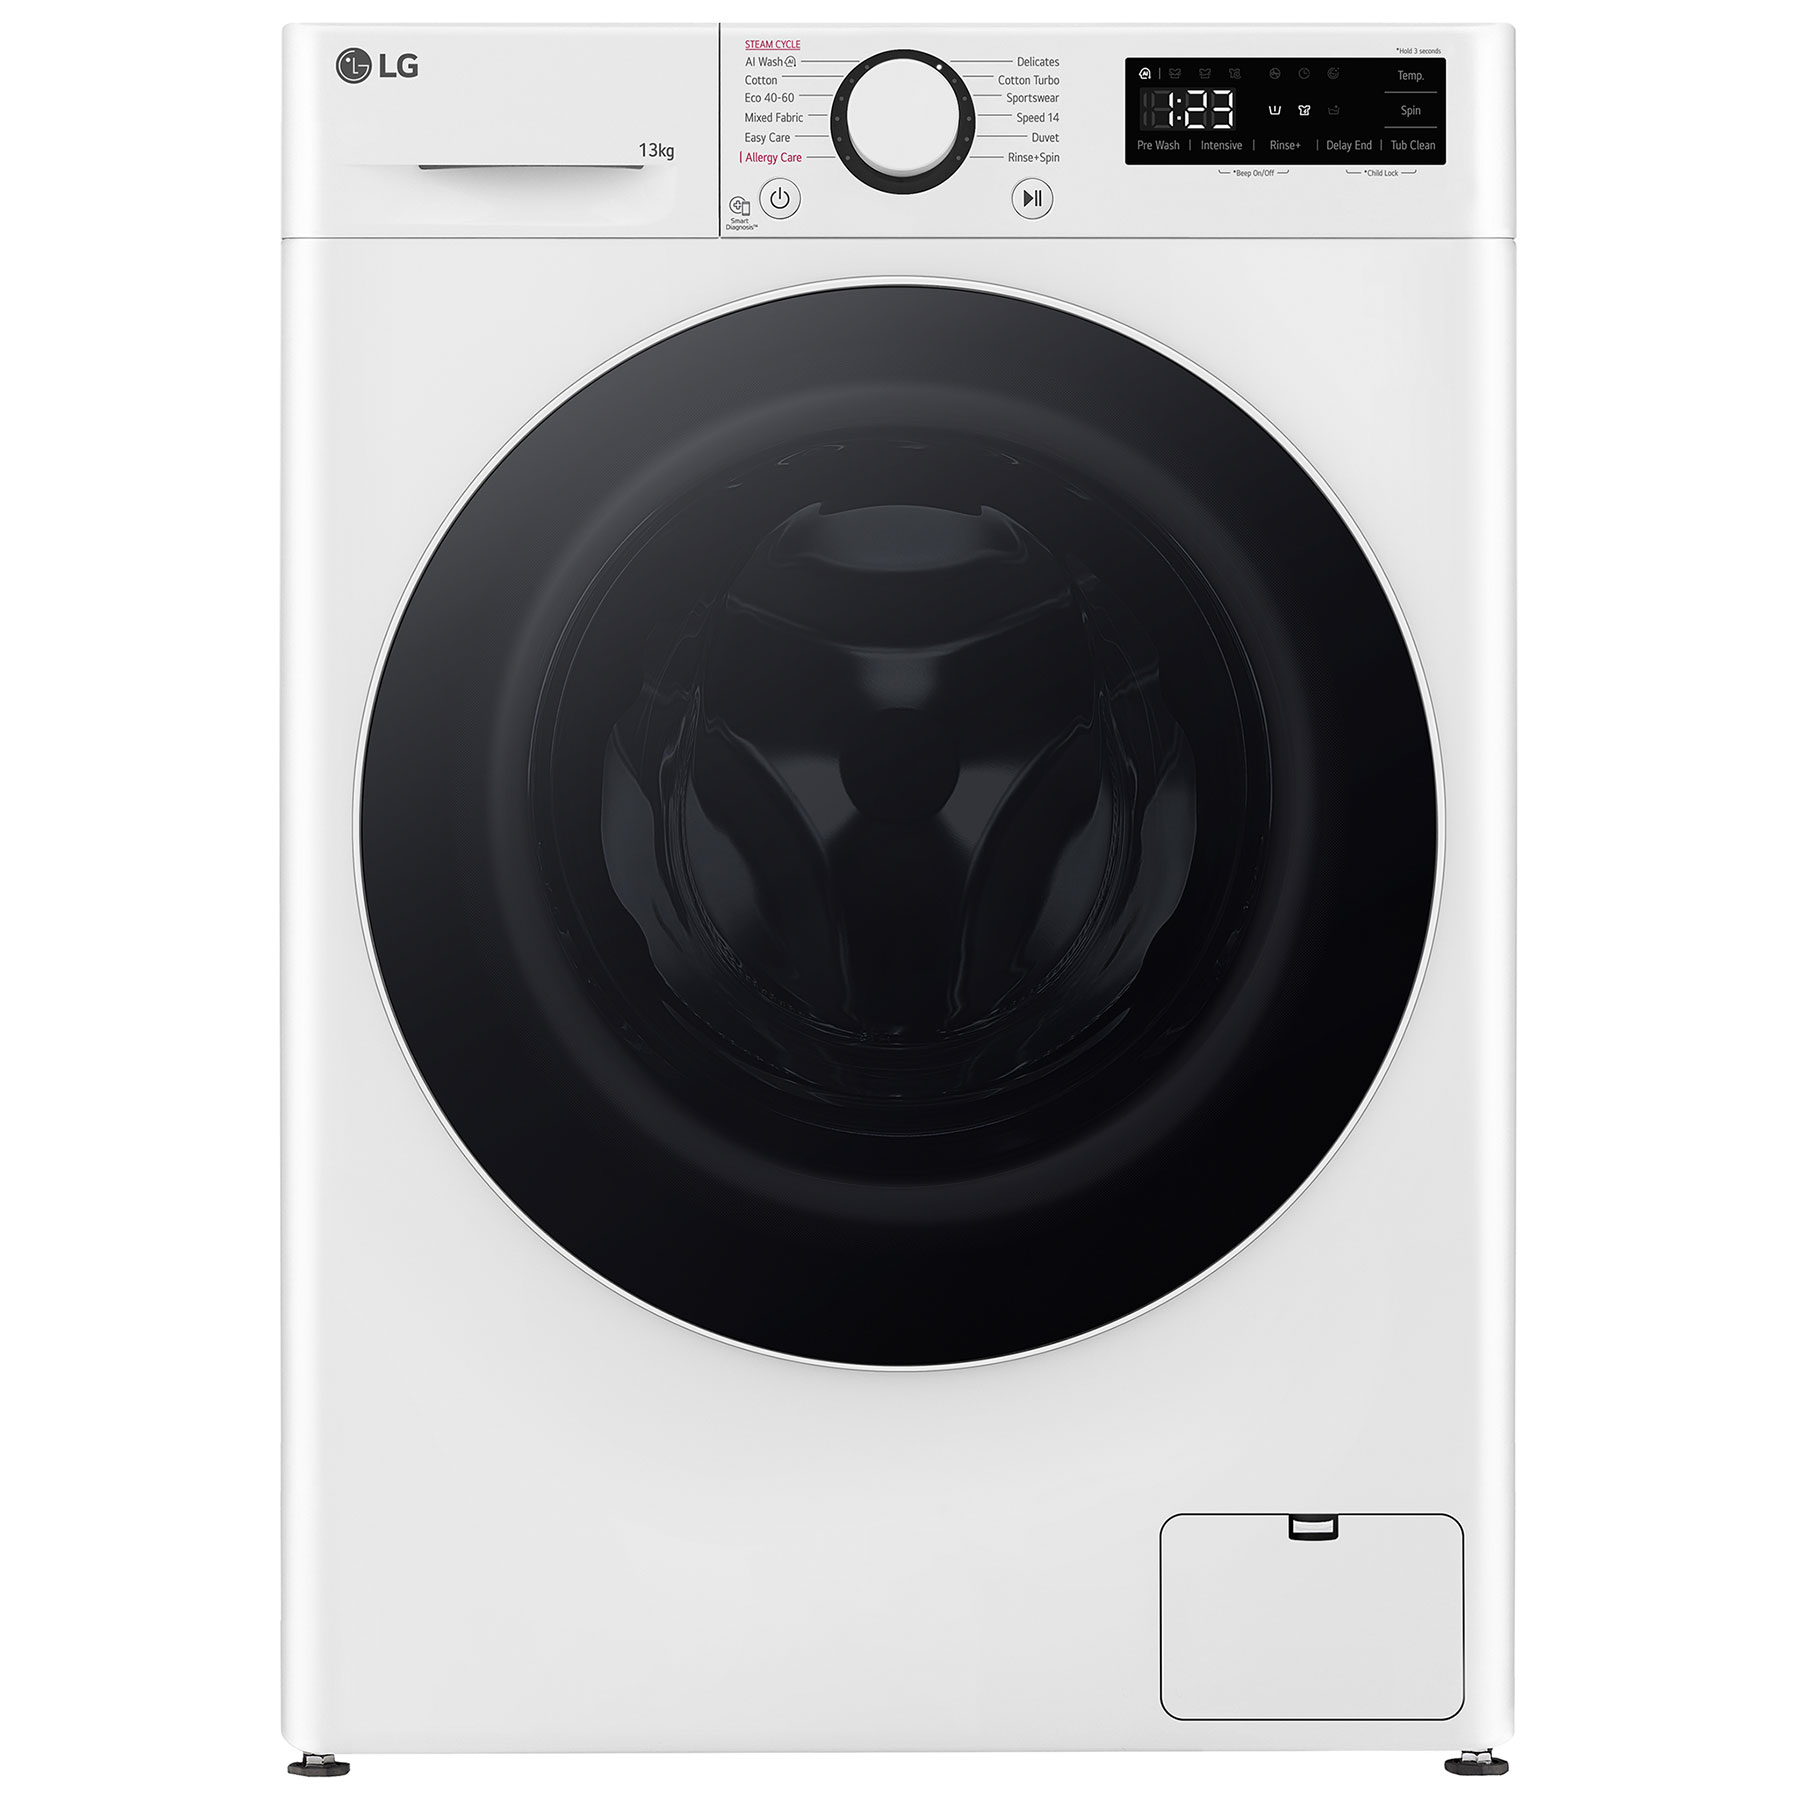 Image of LG F4Y513WWLN1 Washing Machine in White 1400rpm 13kg A Rated